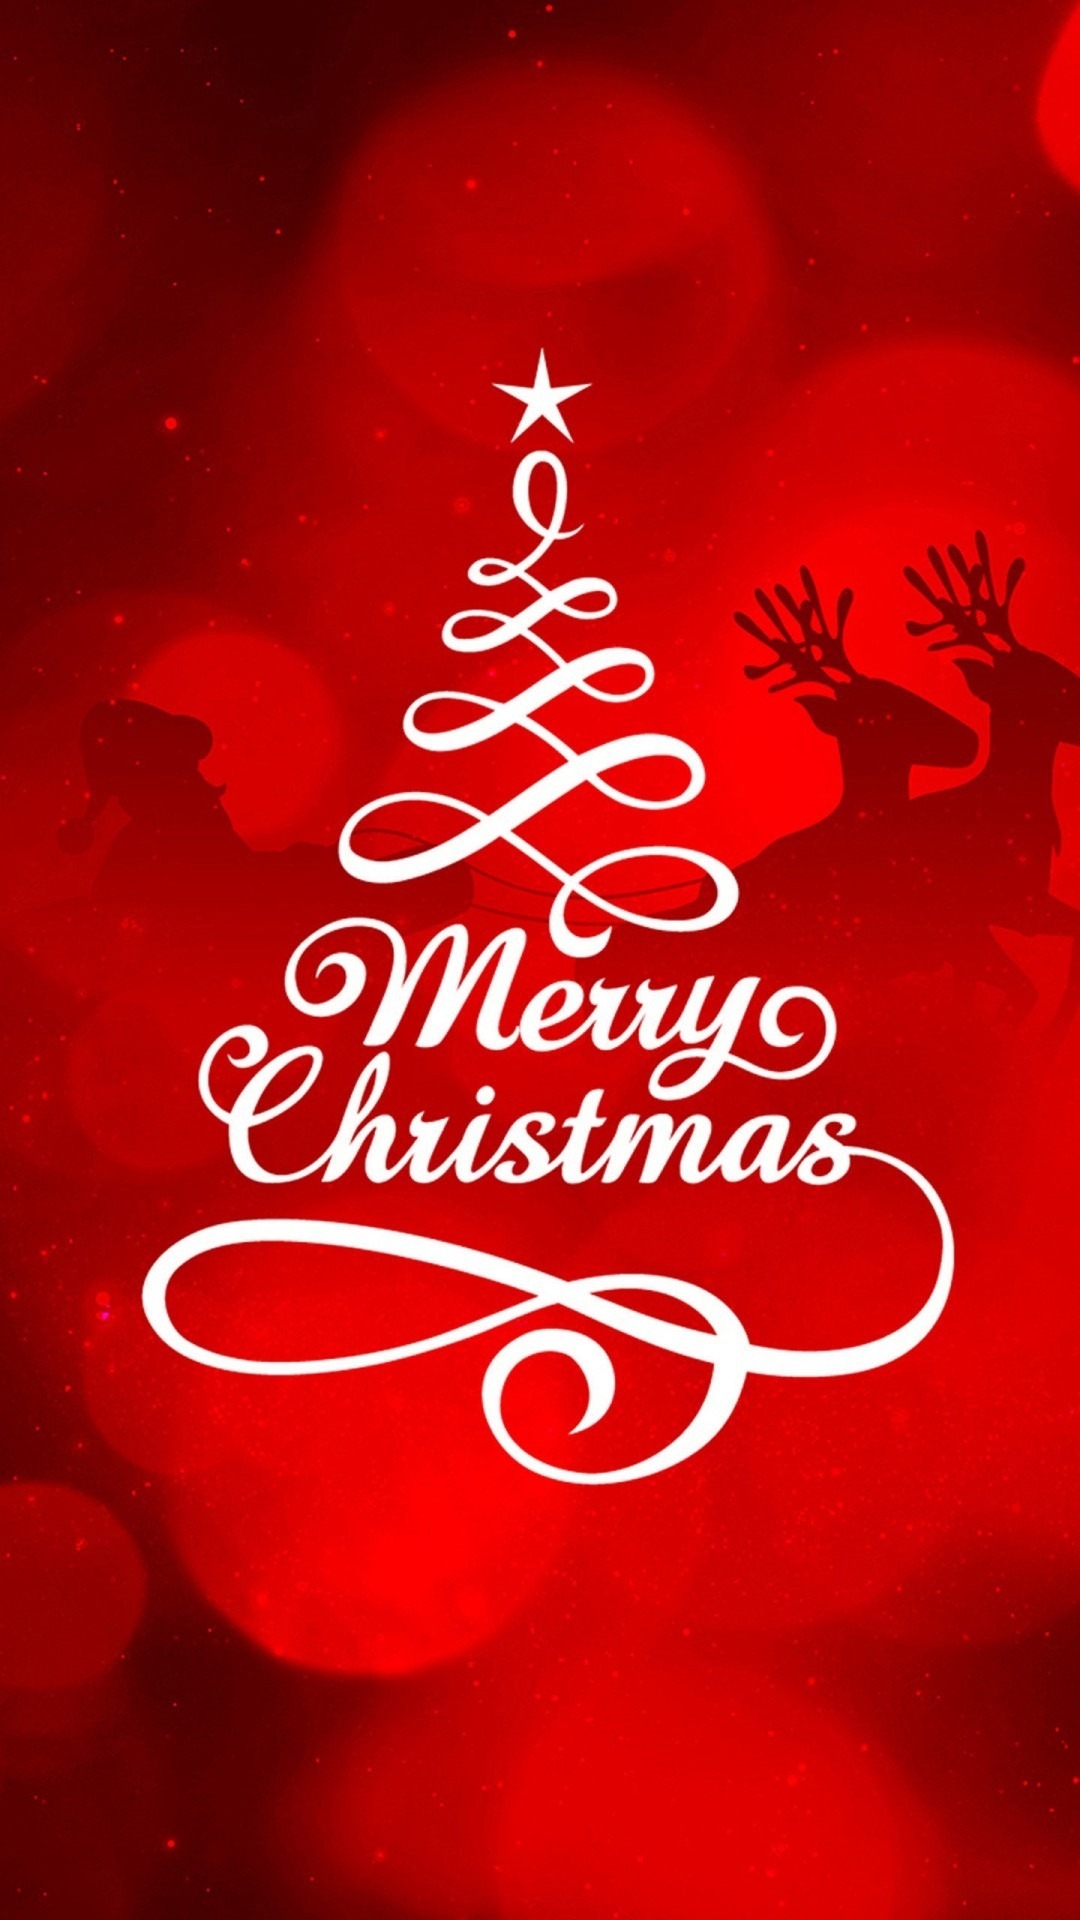 Christmas Hd Wallpapers For Iphone 6 Plus - Merry Christmas Wallpaper Iphone - HD Wallpaper 